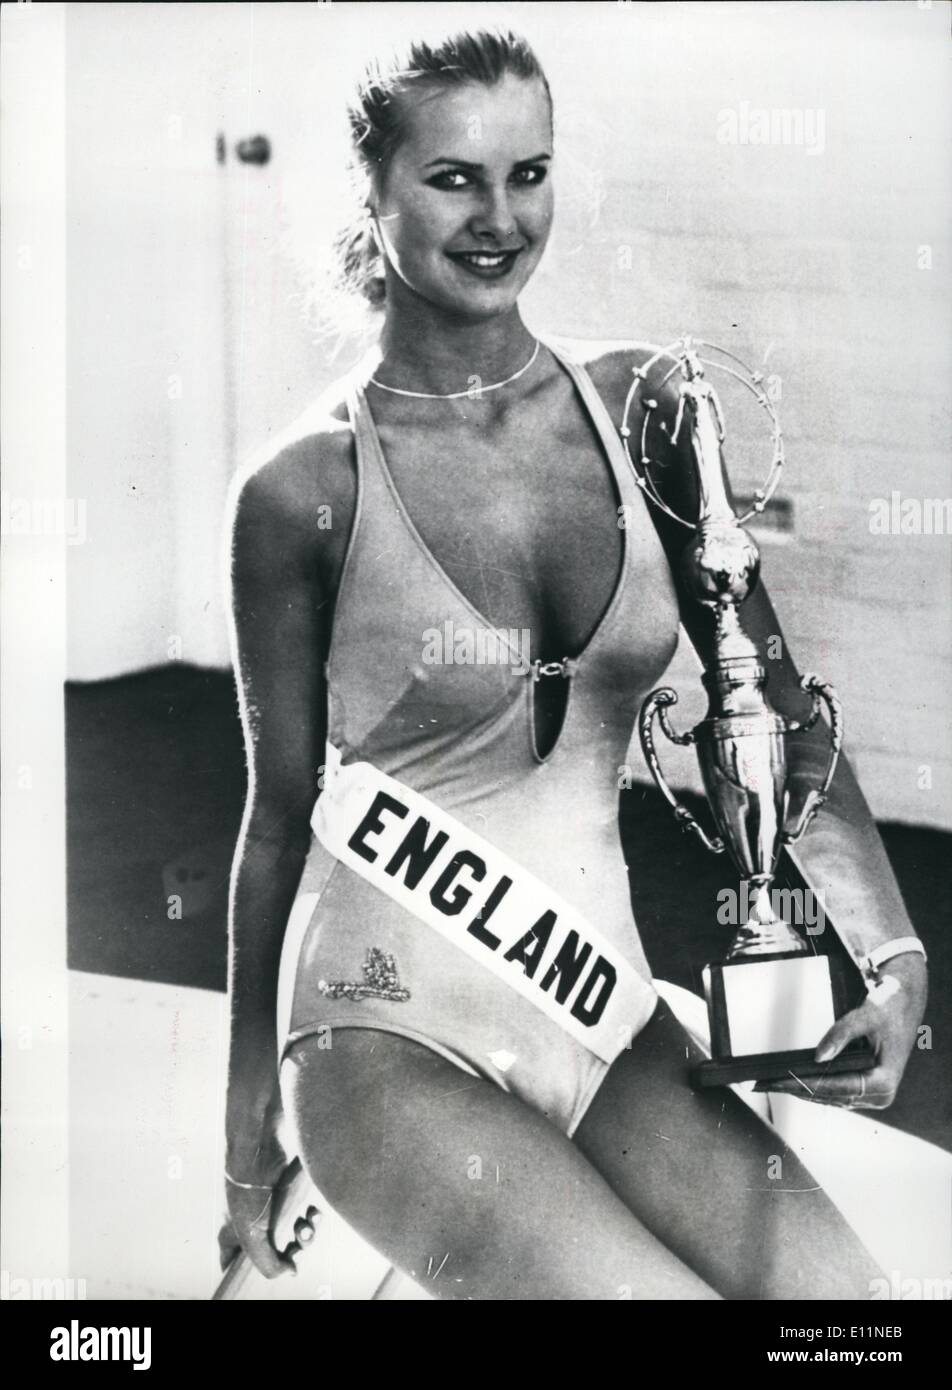 Jul. 07, 1979 - Miss England Clicks With The Photographers: Miss England, 18-year old Carolyn Seaward, who is in Perth, Australia, for the Miss Universe Contest, to be held this week - is a hit with the press photographers covering the event - They have voted her their own award - Miss Photogenic, 1979. Photo shows Miss England, Carolyn Seaward, pictured with her trophy after she was named Miss Photogenic by Press Photographers attending the Miss Universe contest in Perth, Australia. Stock Photo